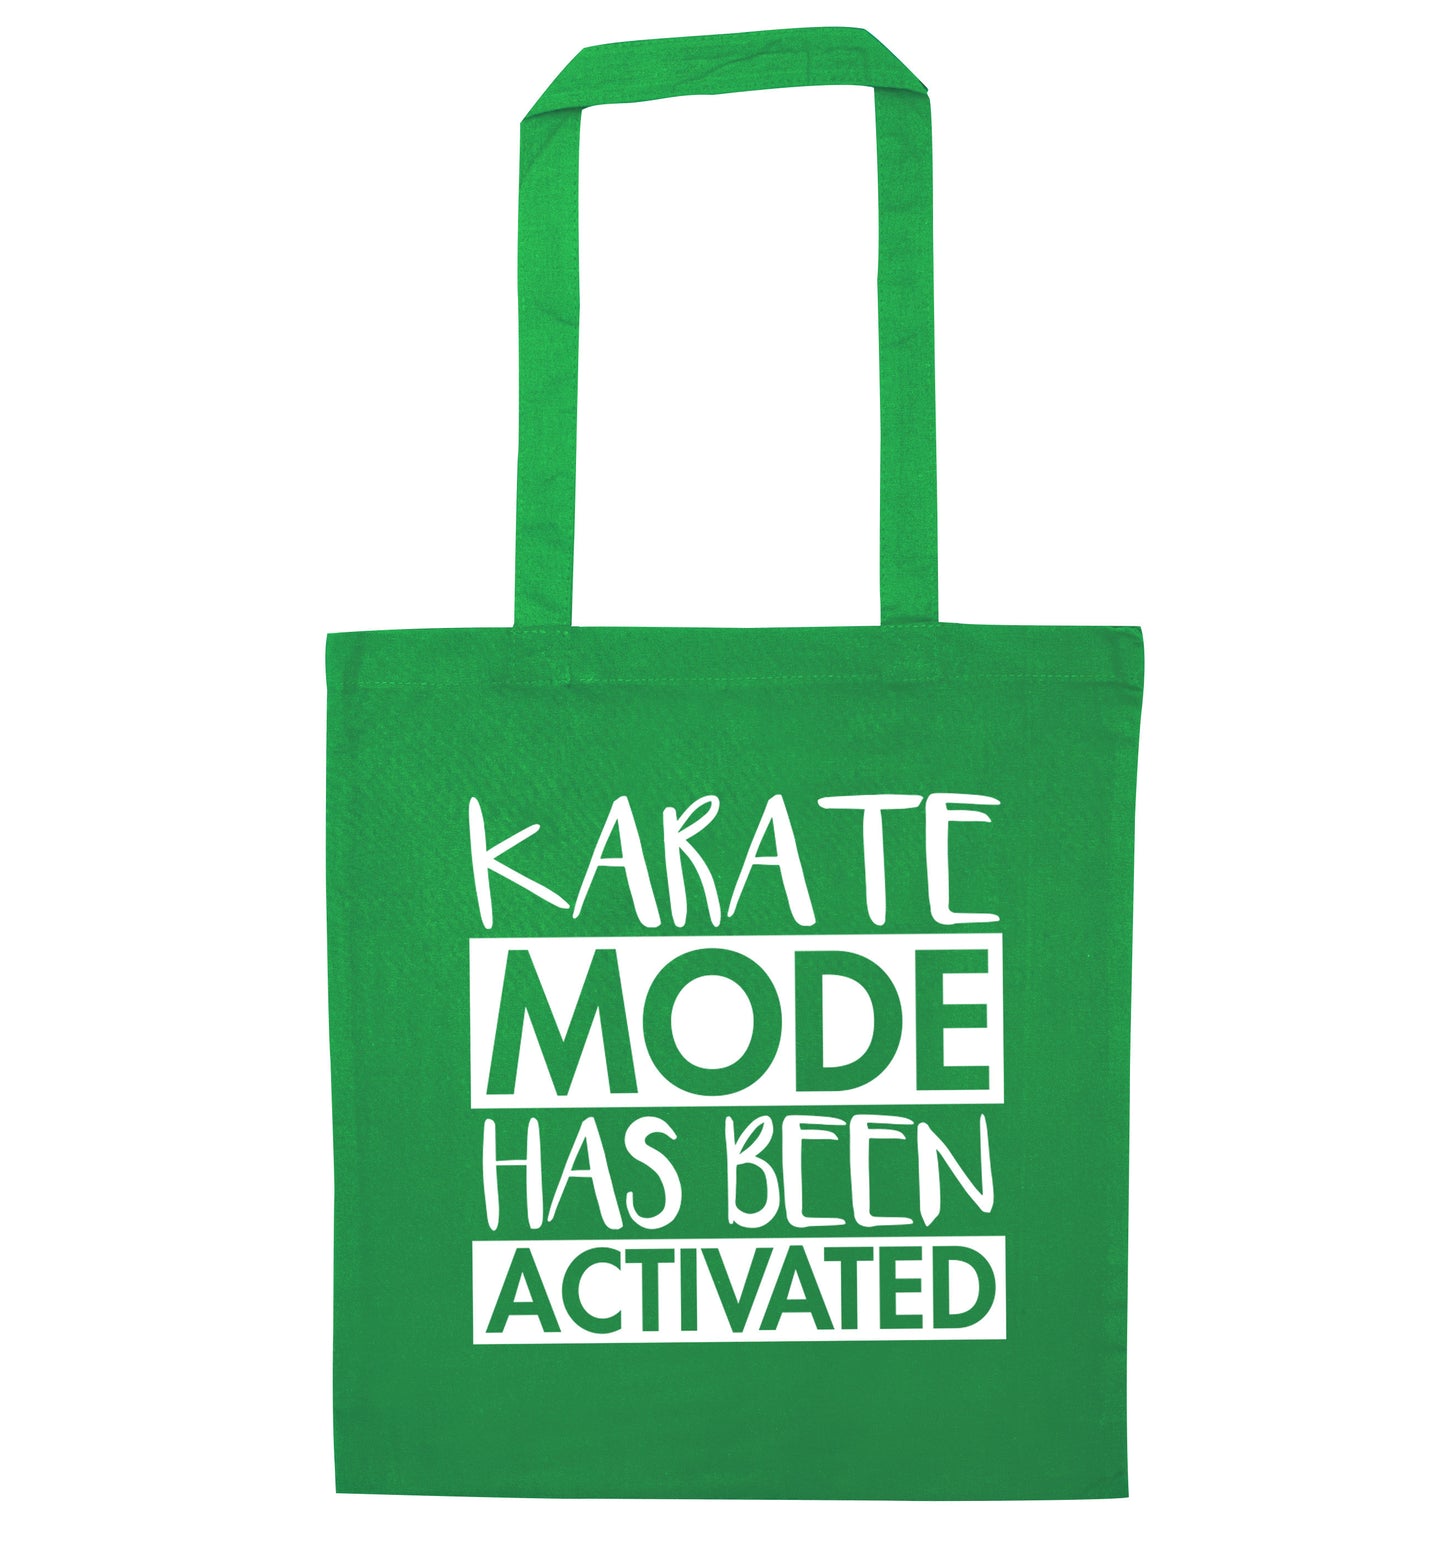 Karate mode activated green tote bag